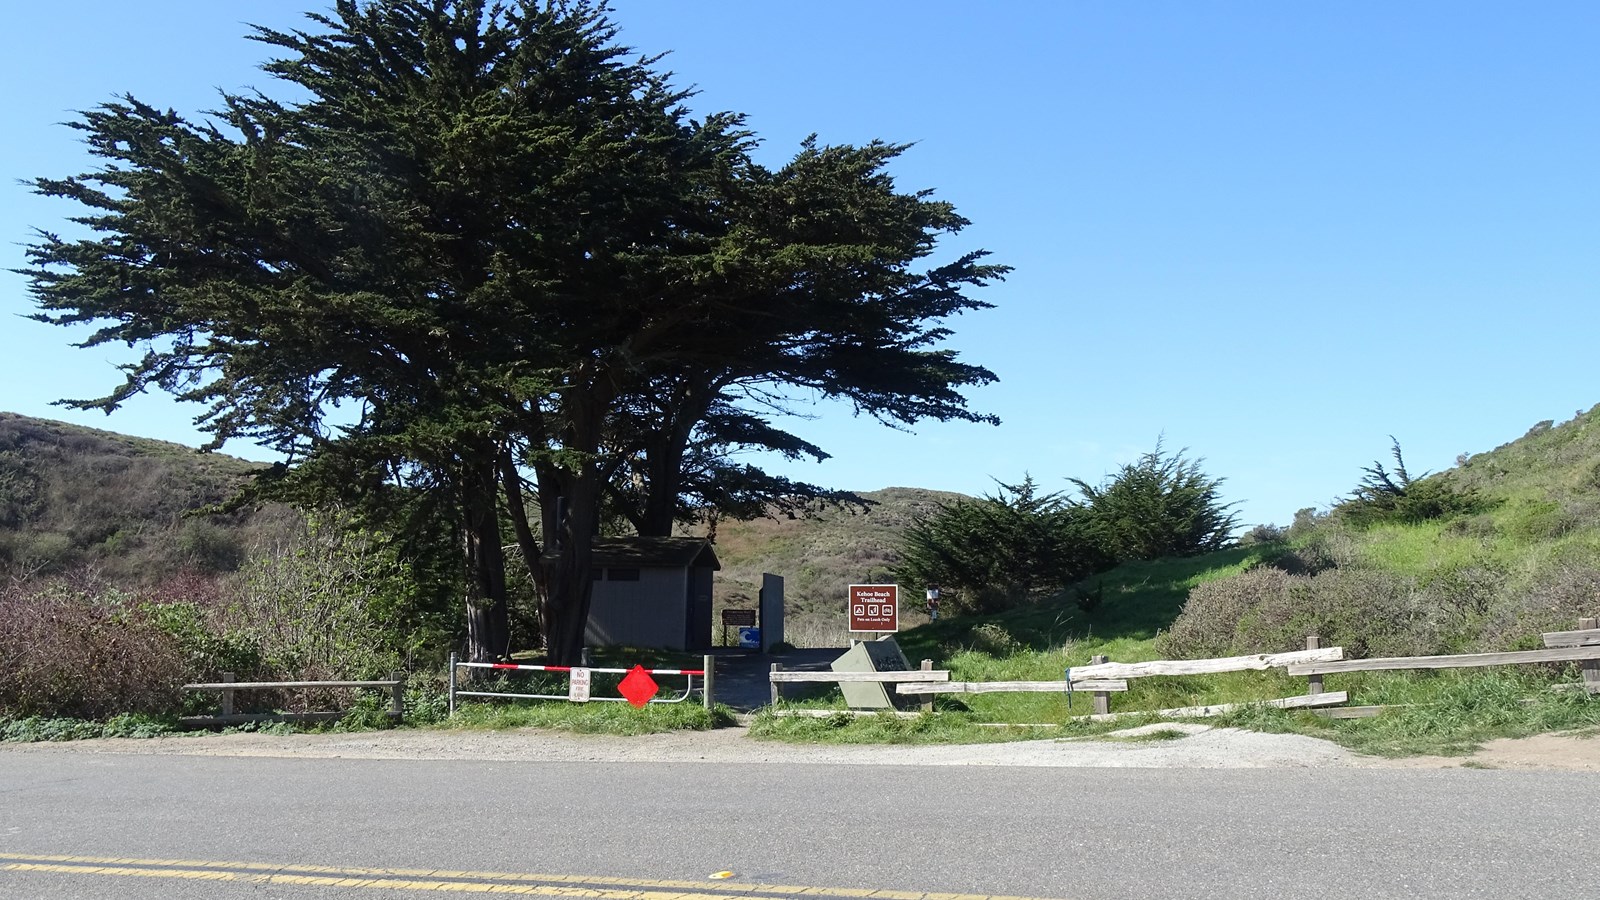 A dirt trail passes by a gate, refuse containers, a trailhead sign, trees, and vault toilets.